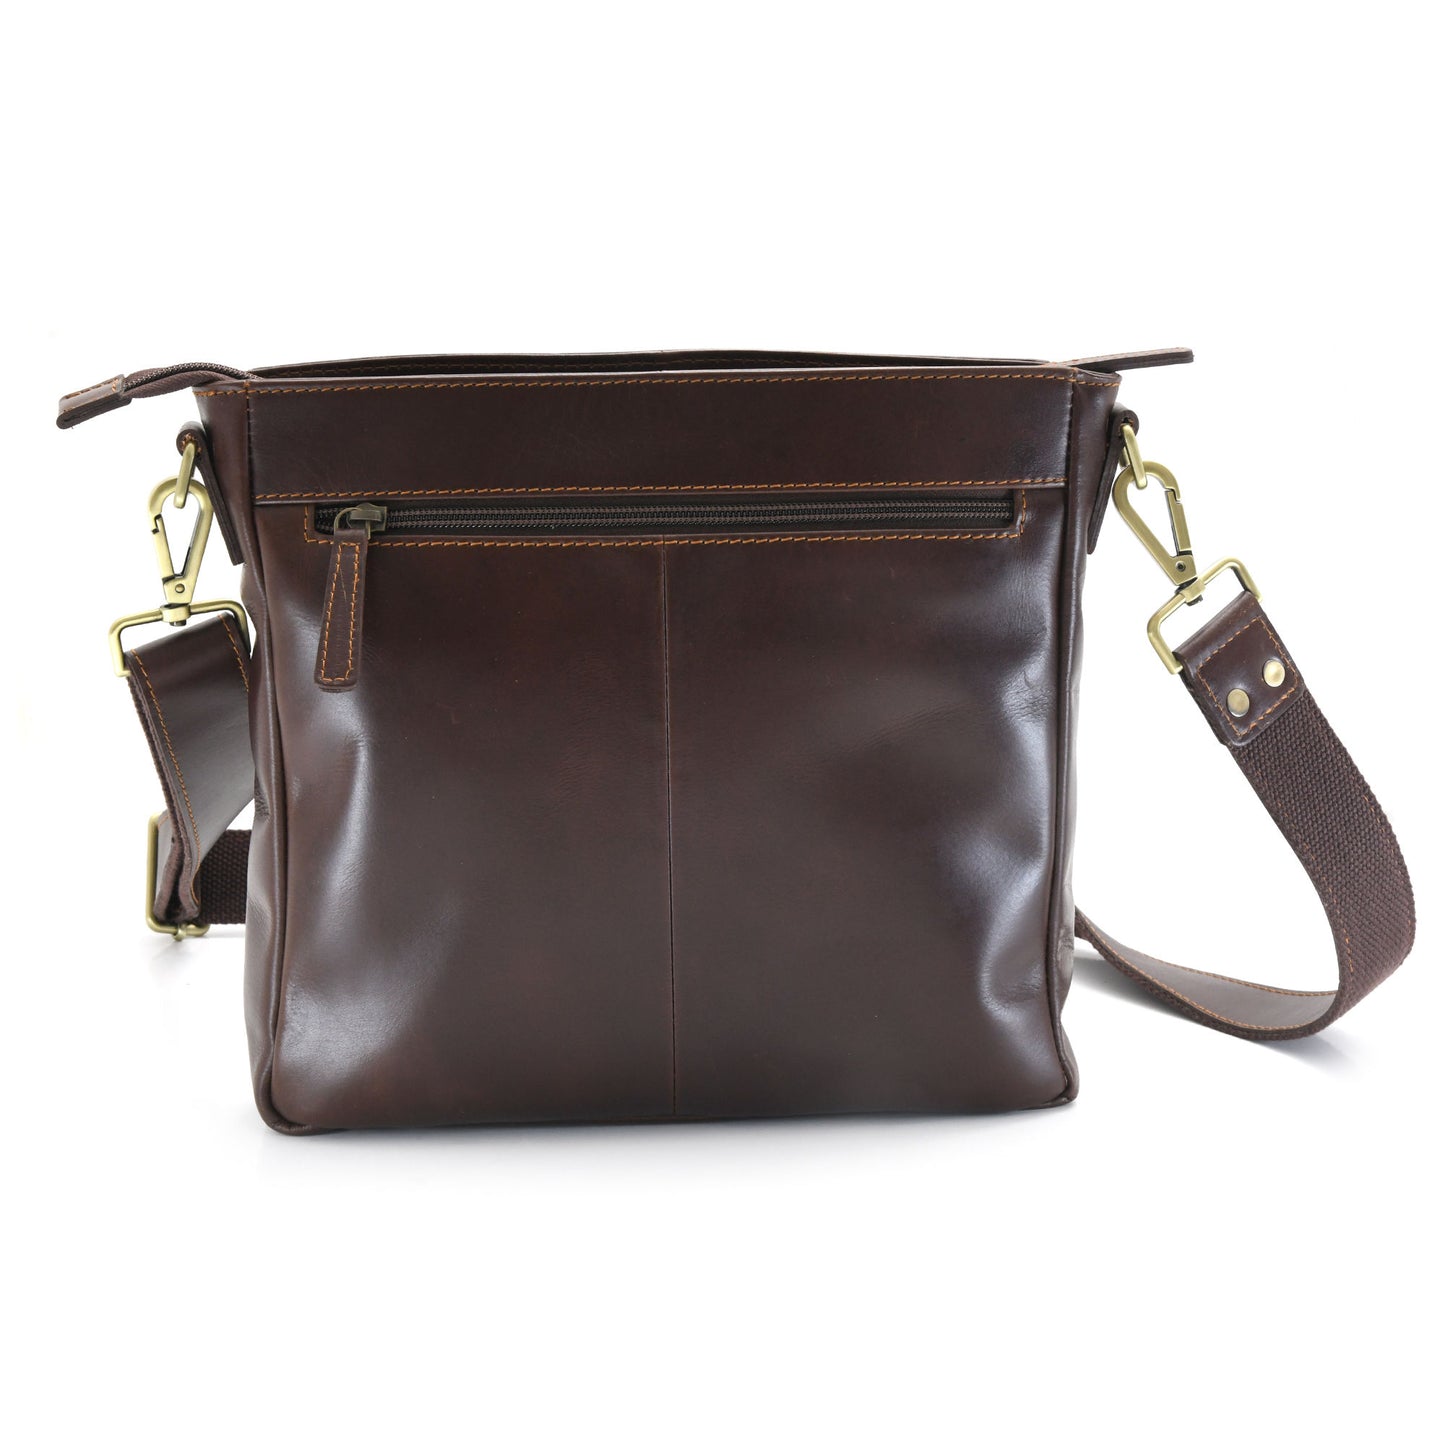 Style n Craft 392001 Cross-body Messenger Bag in Full Grain Dark Brown Leather - Back View showing the Zippered Pocket at the Back